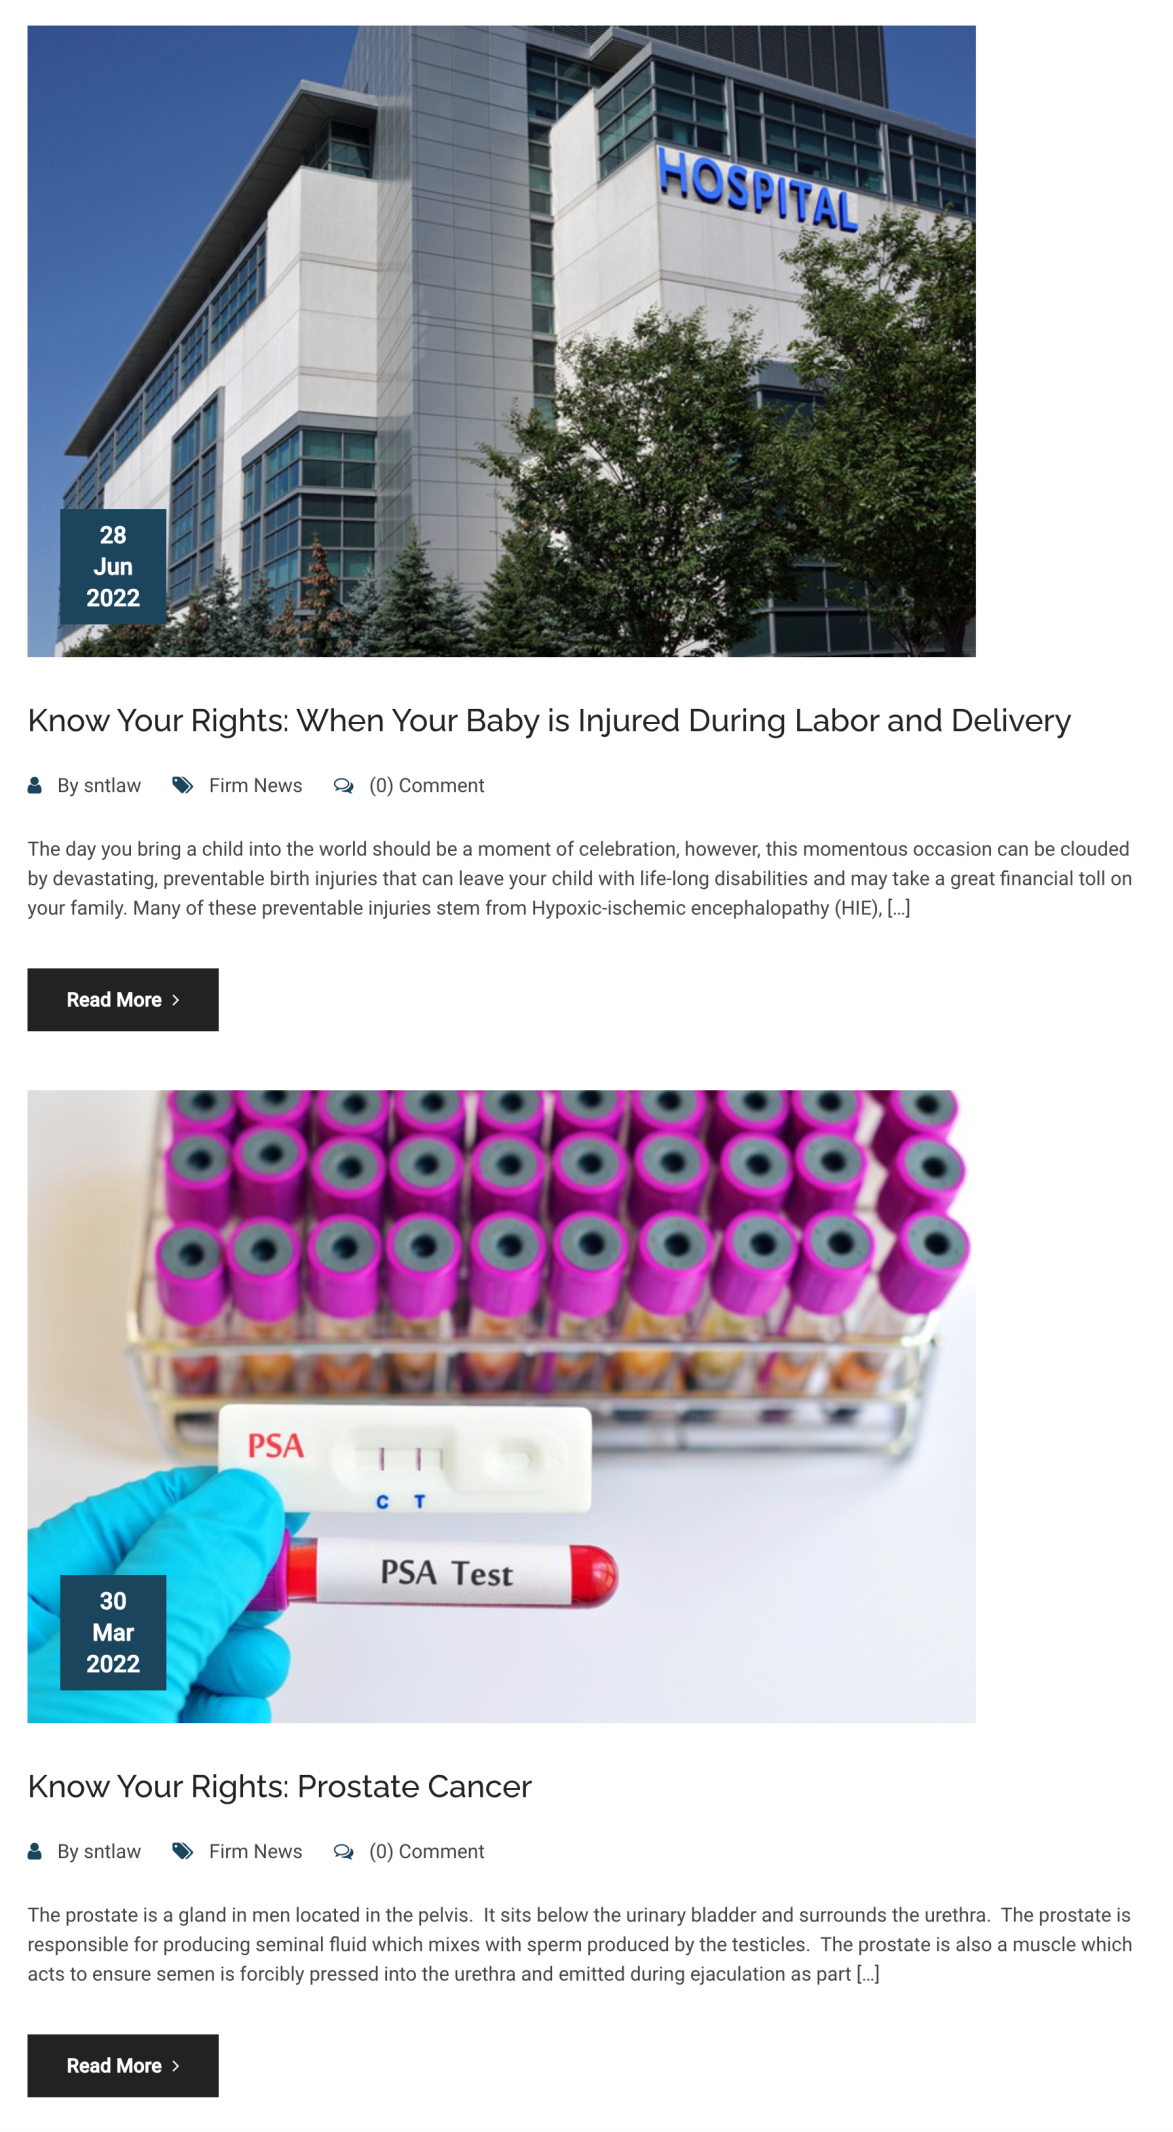 Sanocki Newman & Turret's blog posts as part of their "Know Your Rights" series